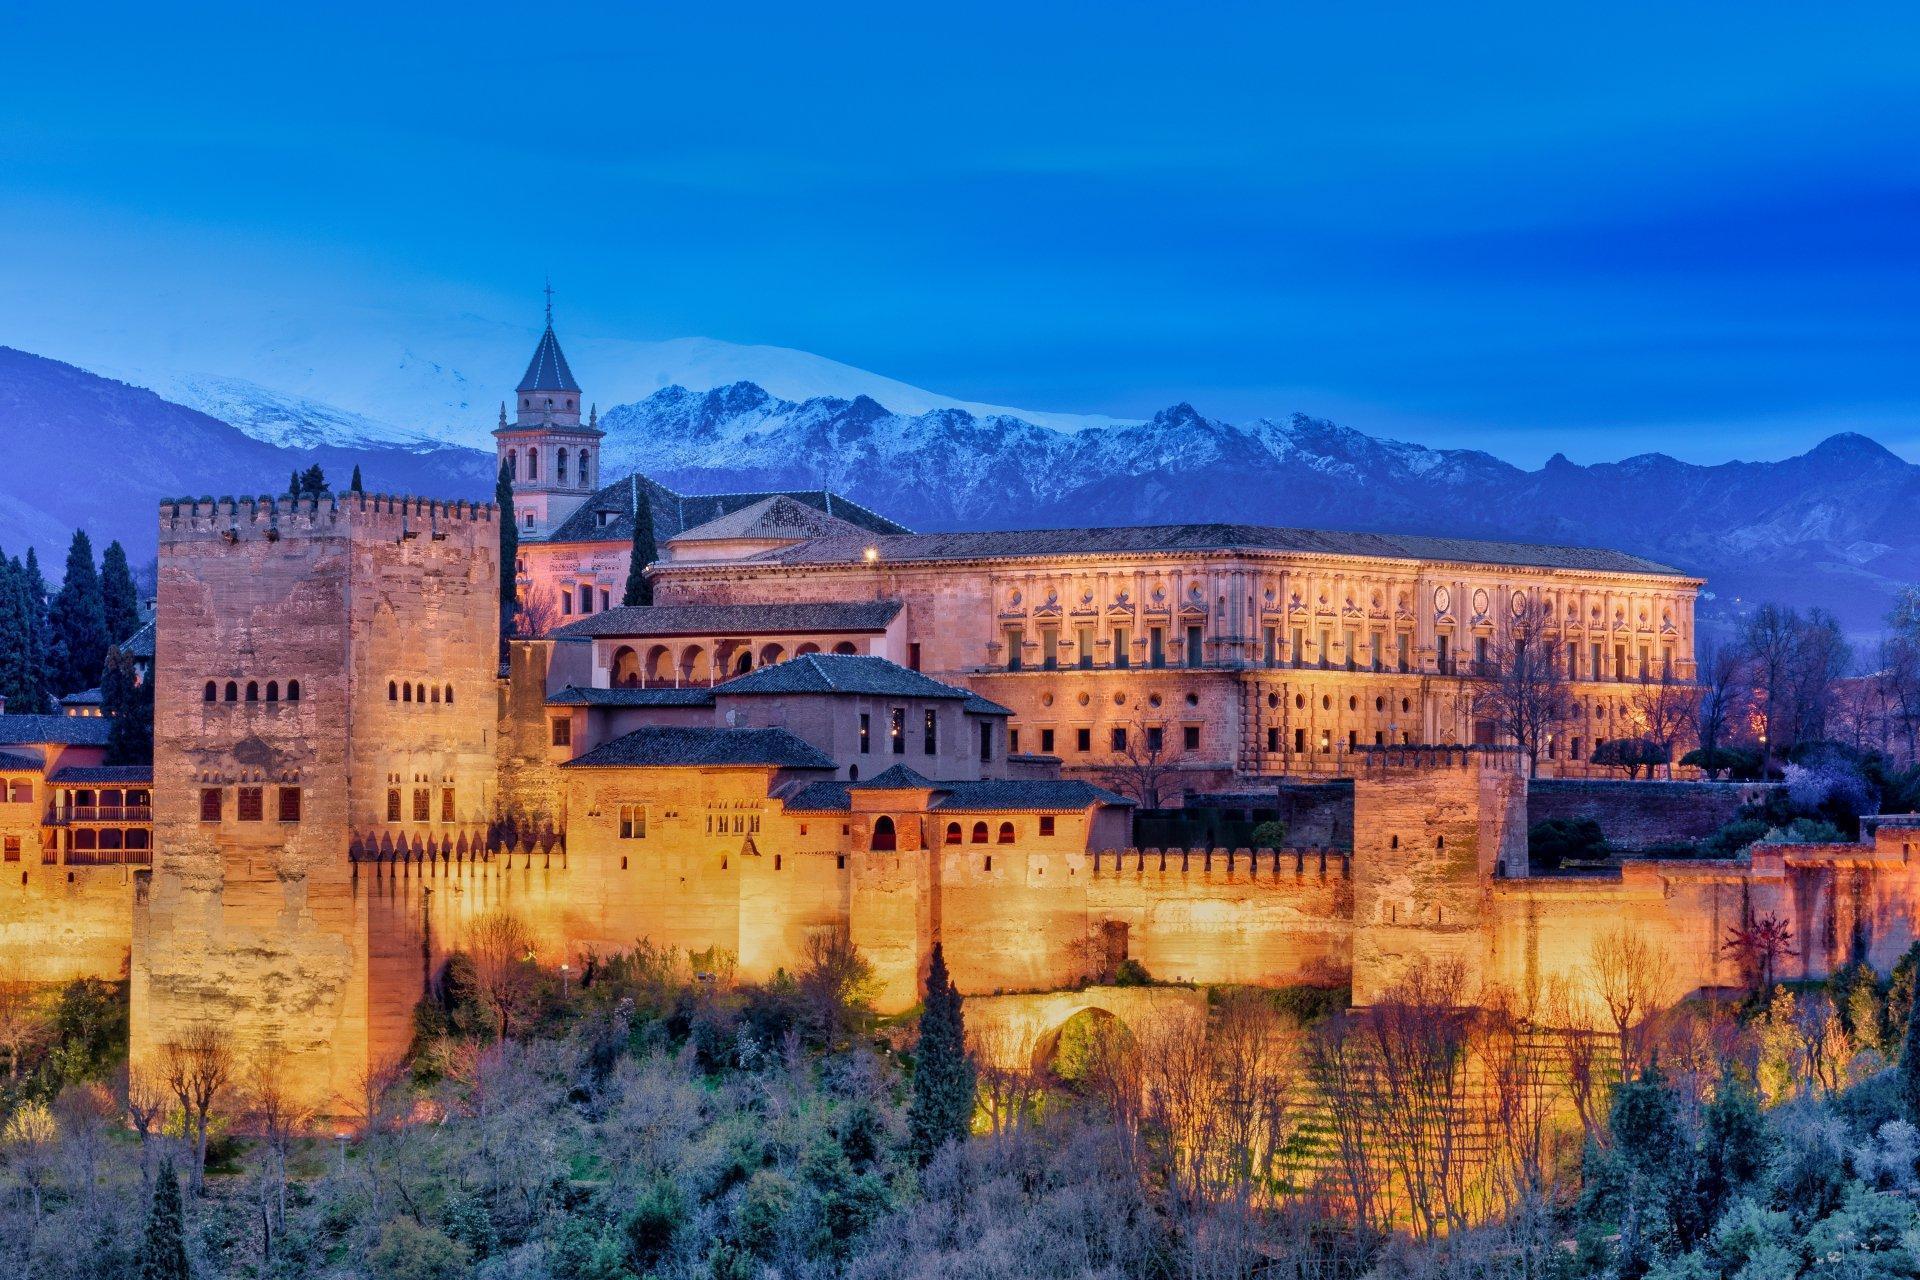 The Alhambra at night.